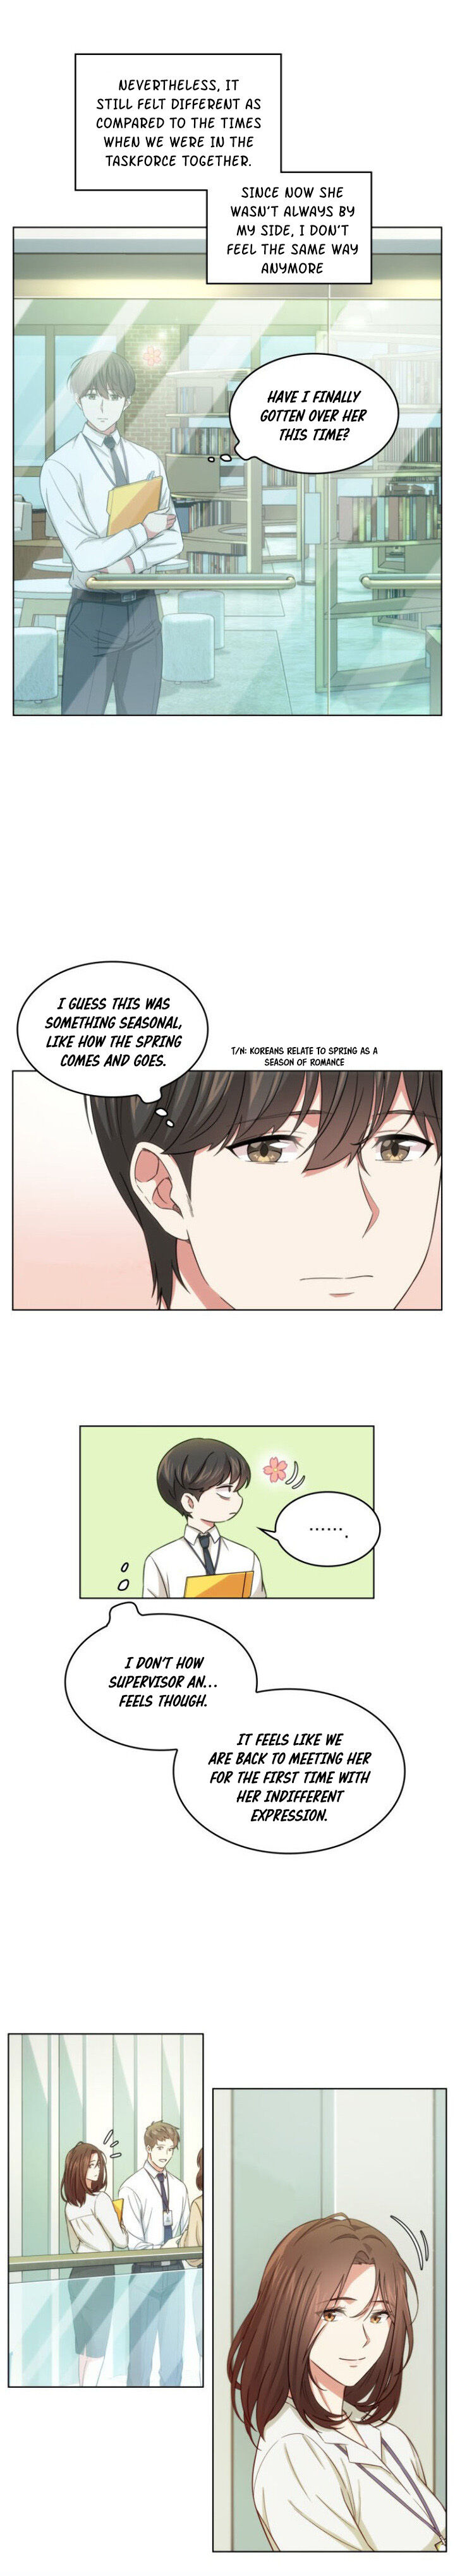 My Office Noona’s Story - Chapter 12 Page 6